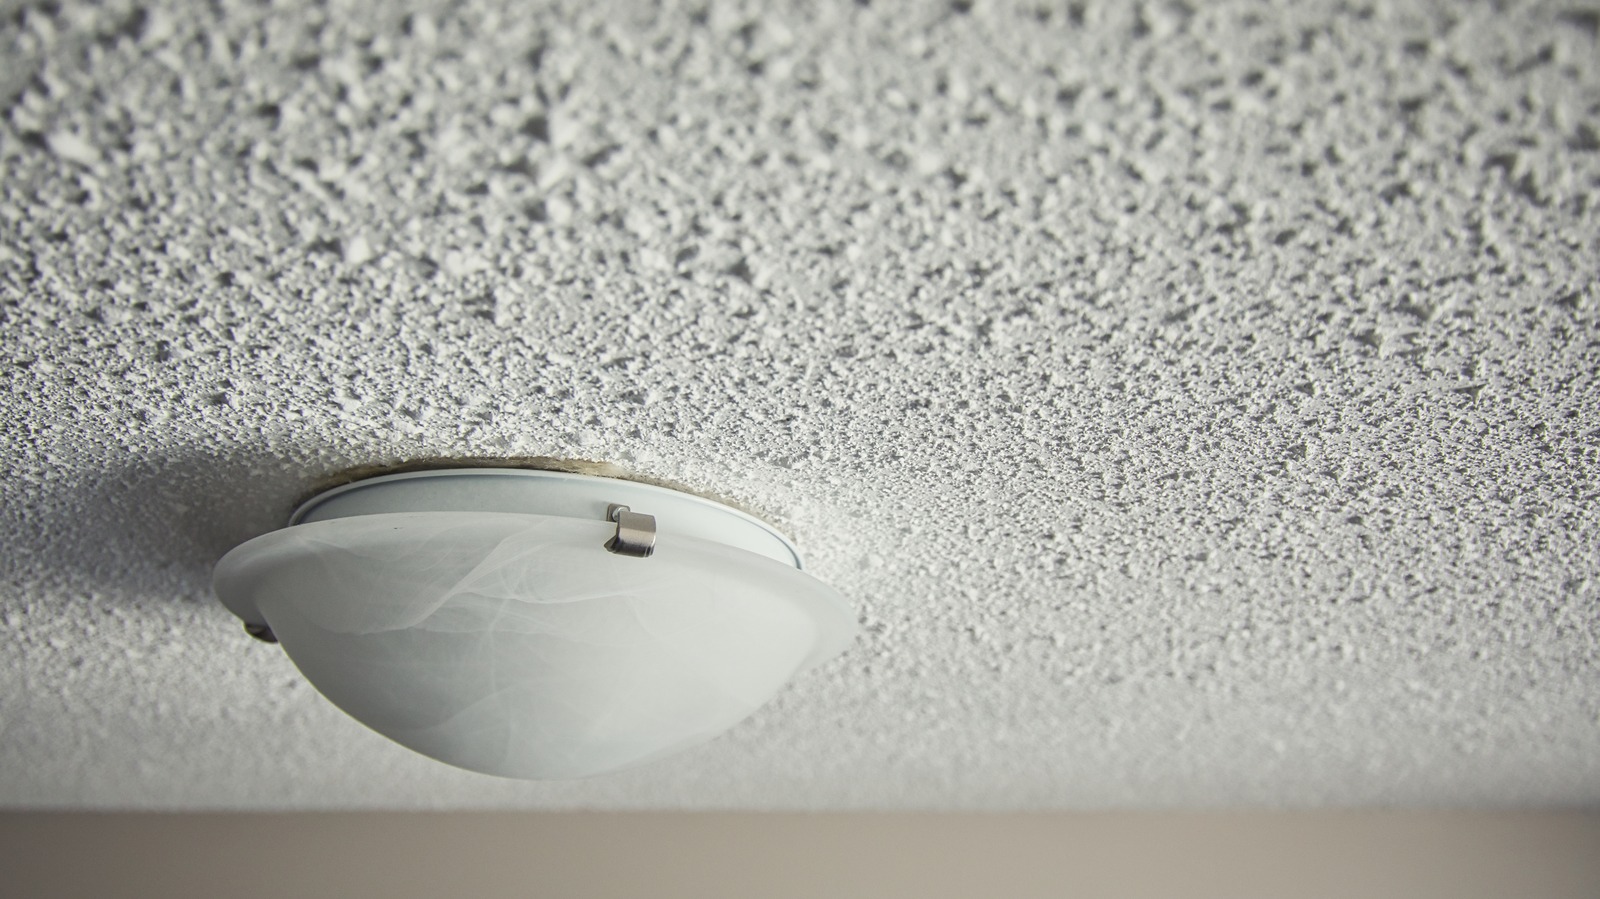 HGTV's Trick For Removing Popcorn Ceilings Has DIYers Attention